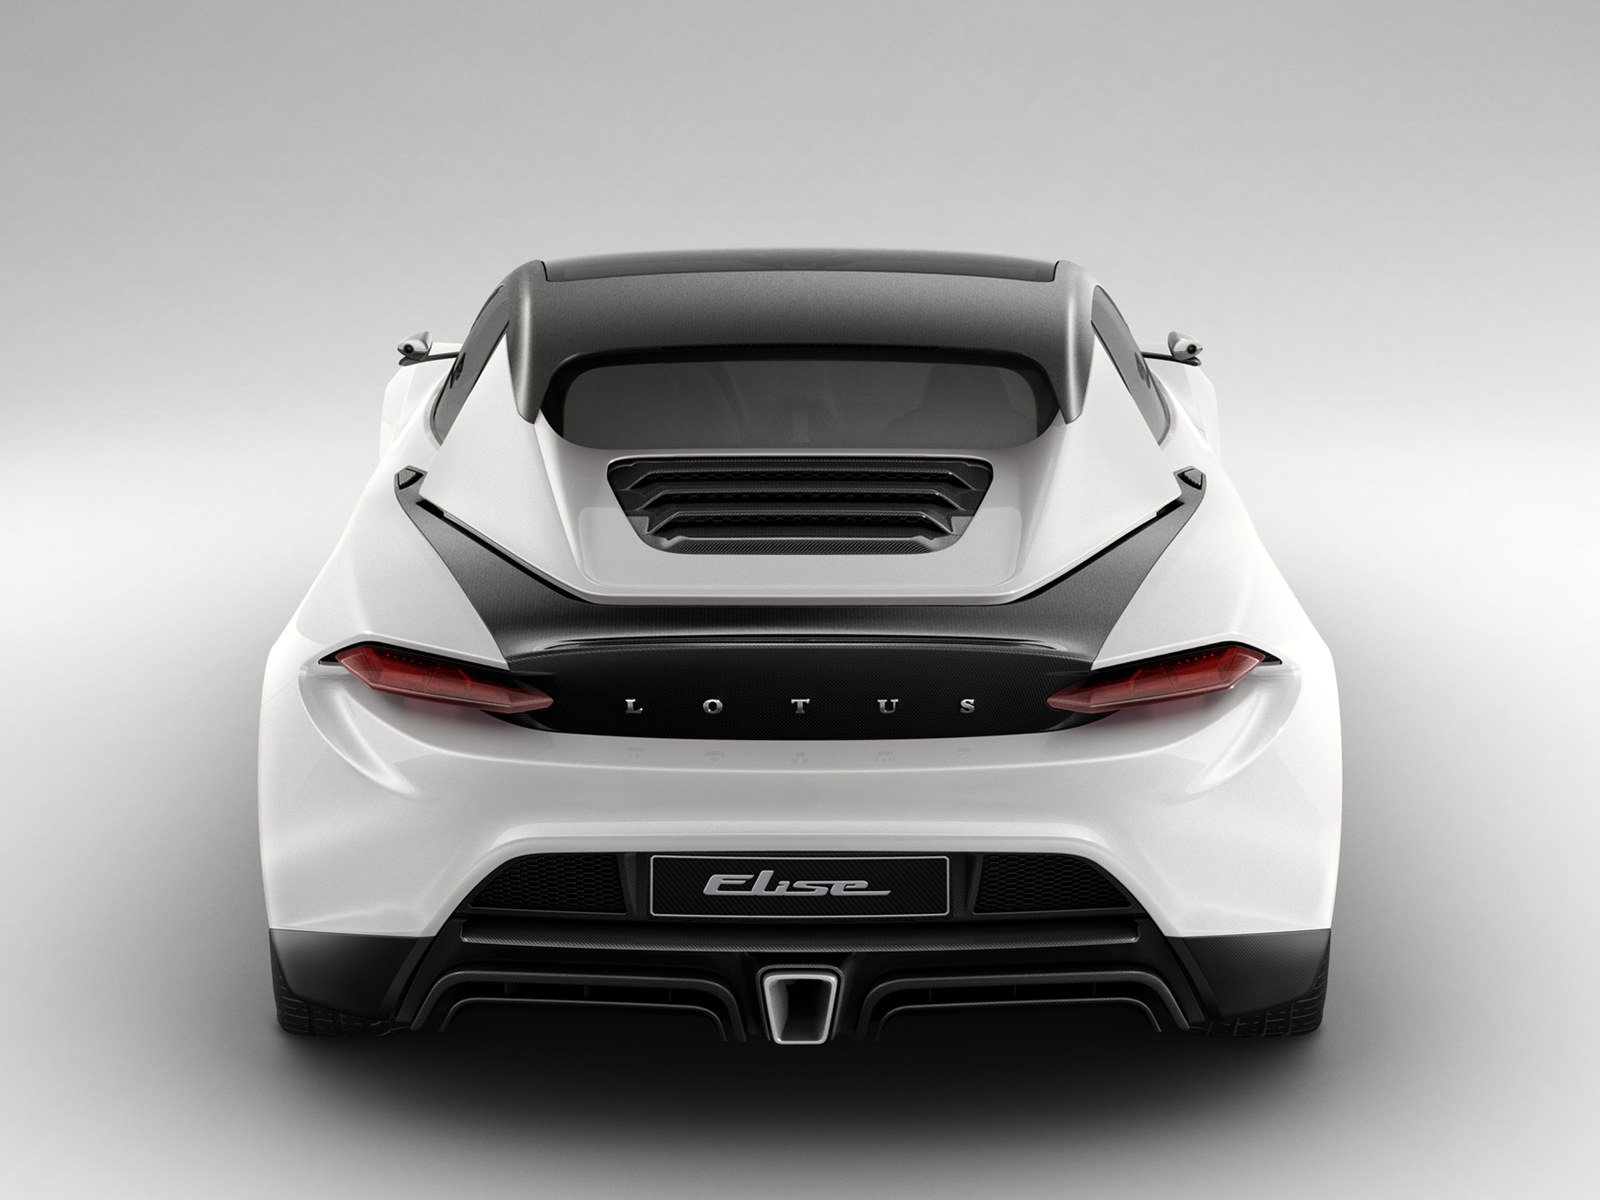 Special edition of concept cars wallpaper (15) #15 - 1600x1200